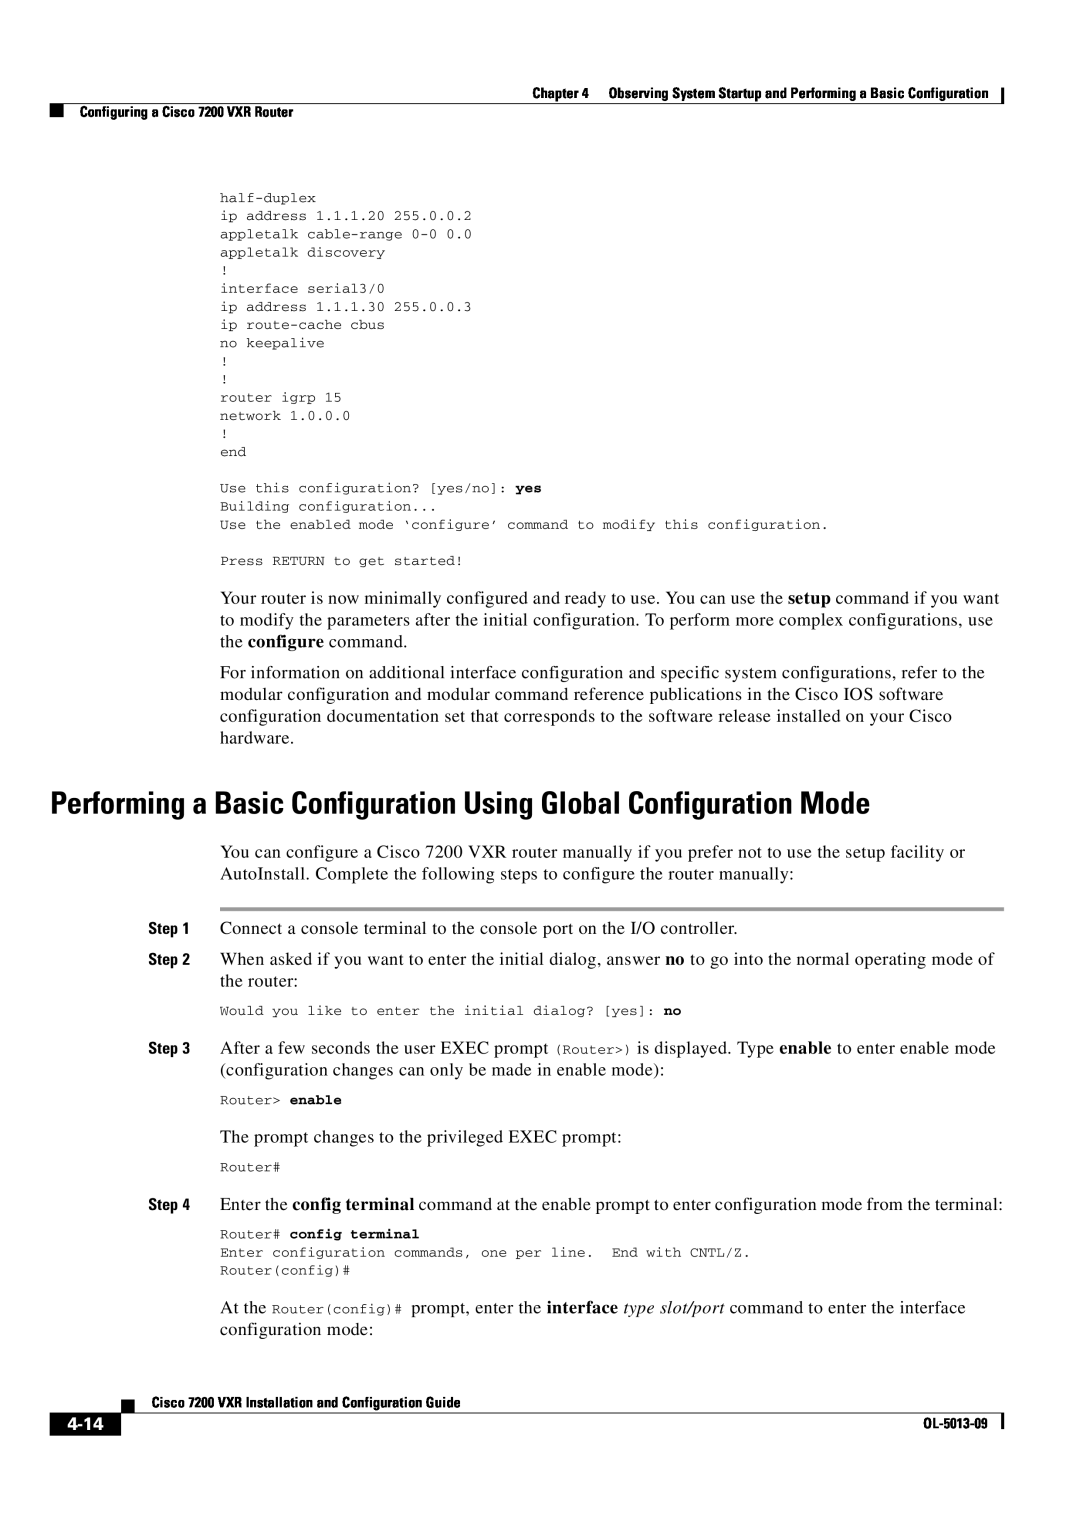 Cisco Systems 7200 VXR manual Performing a Basic Configuration Using Global Configuration Mode, 4-14 